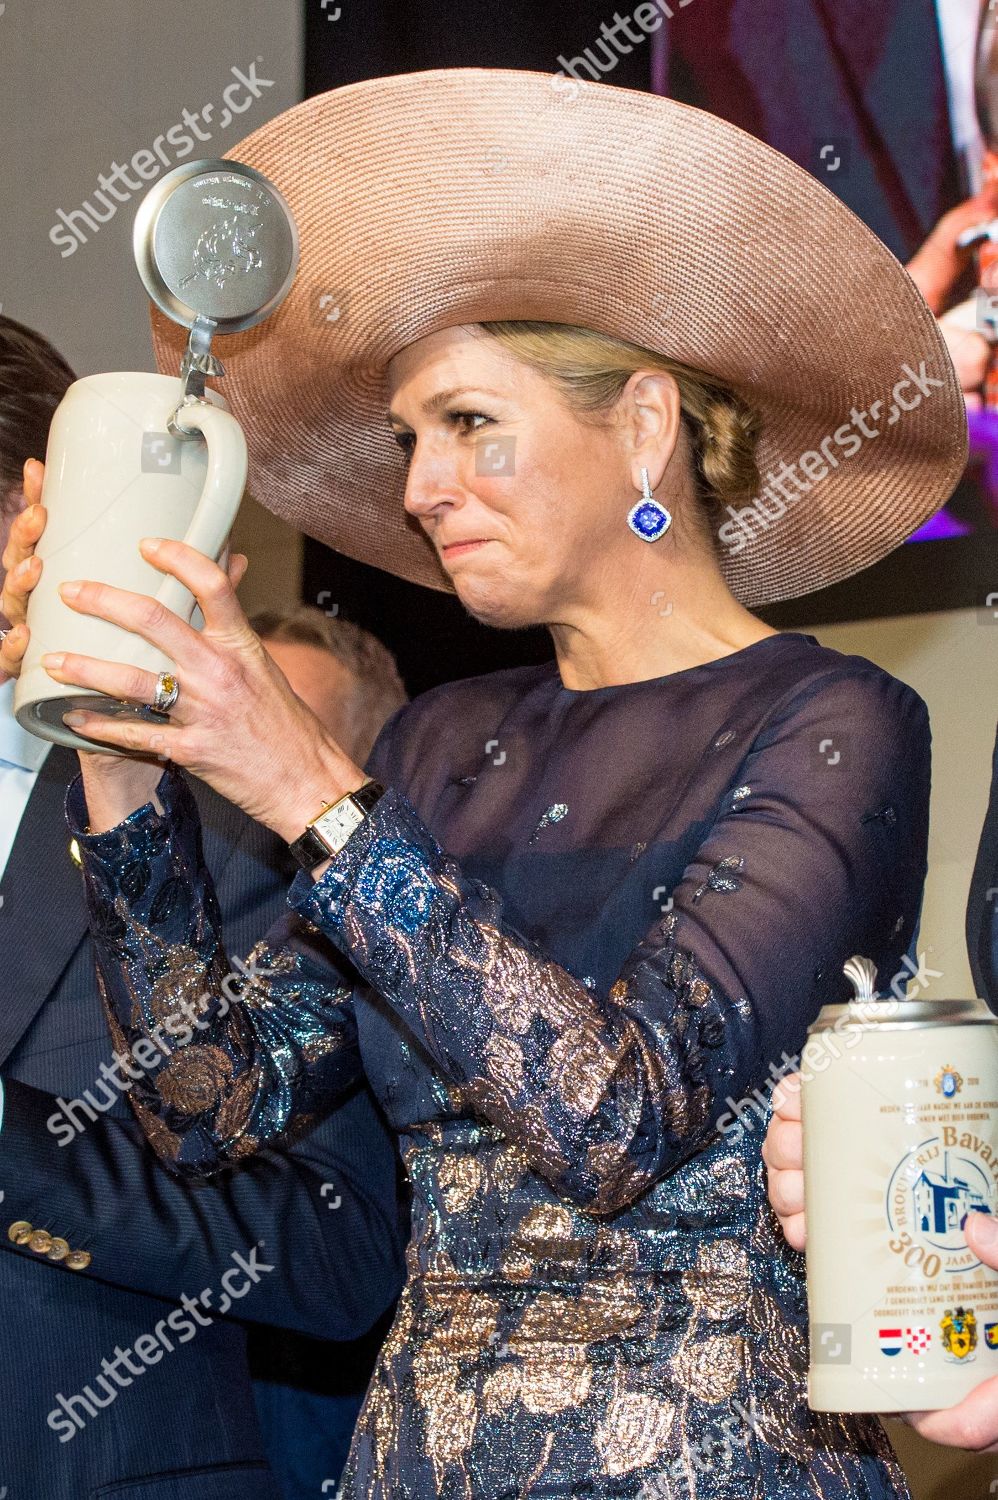 queen-maxima-visit-to-the-bavaria-brewery-lieshout-netherlands-shutterstock-editorial-10180868aw.jpg